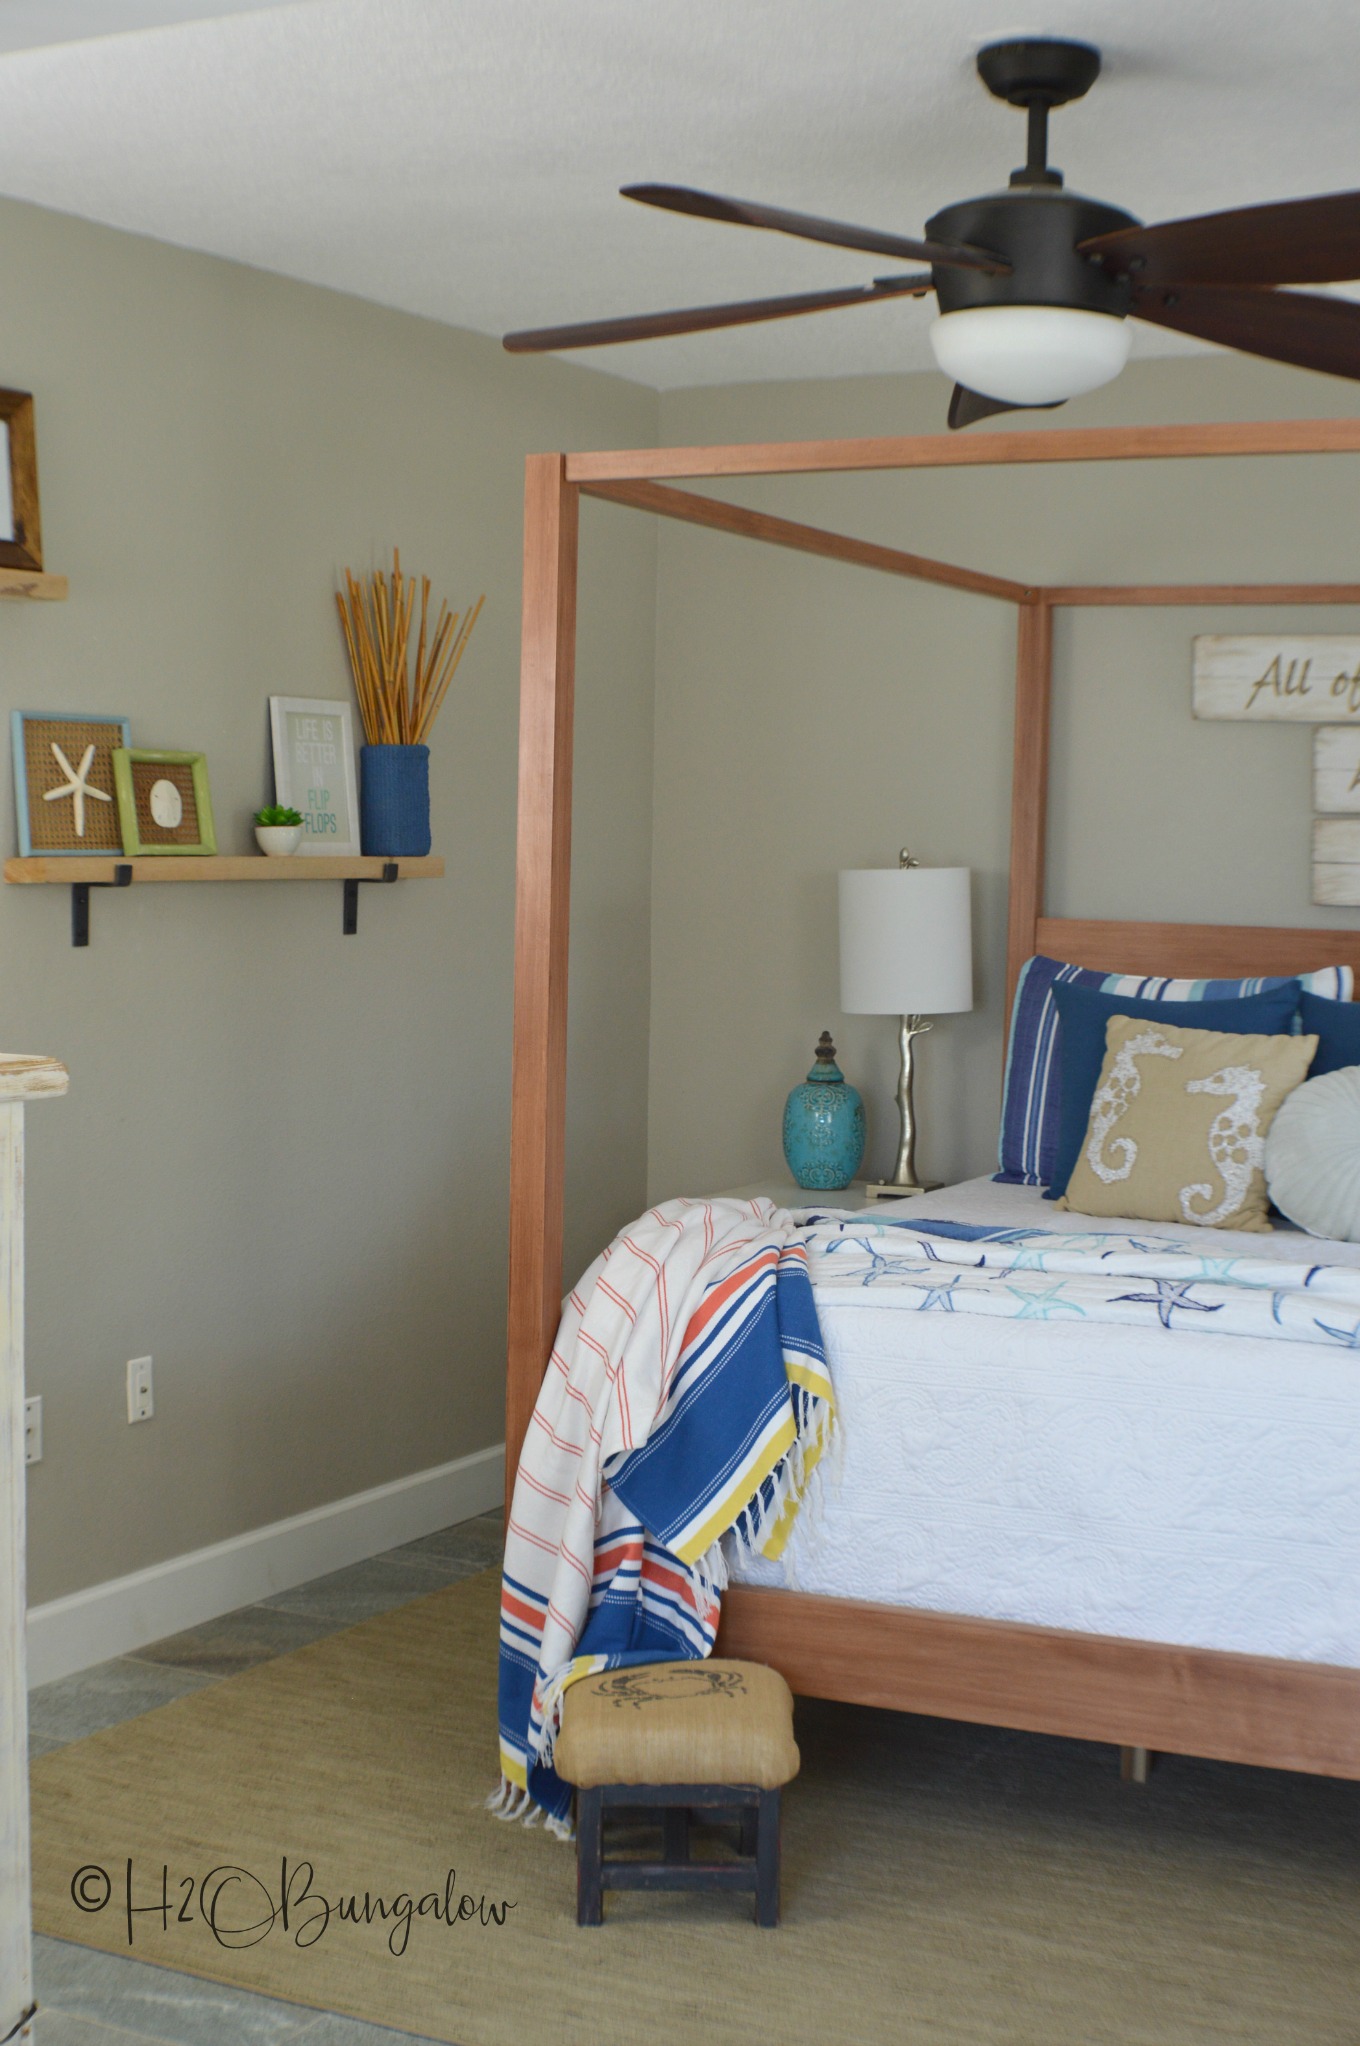 I'm so excited to share my modern coastal bedroom makeover with you guys today!  It's actually more of a redecorating bedroom refresh than a full blown makeover.  But, by changing the color palette,  adding a huge scrumptiously textured area rug and and few creative decor pieces it has the look of a whole new room.  This modern coastal bedroom makeover is fresh and contemporary while being warm and inviting.  Which is everything I'd want in a bedroom retreat.